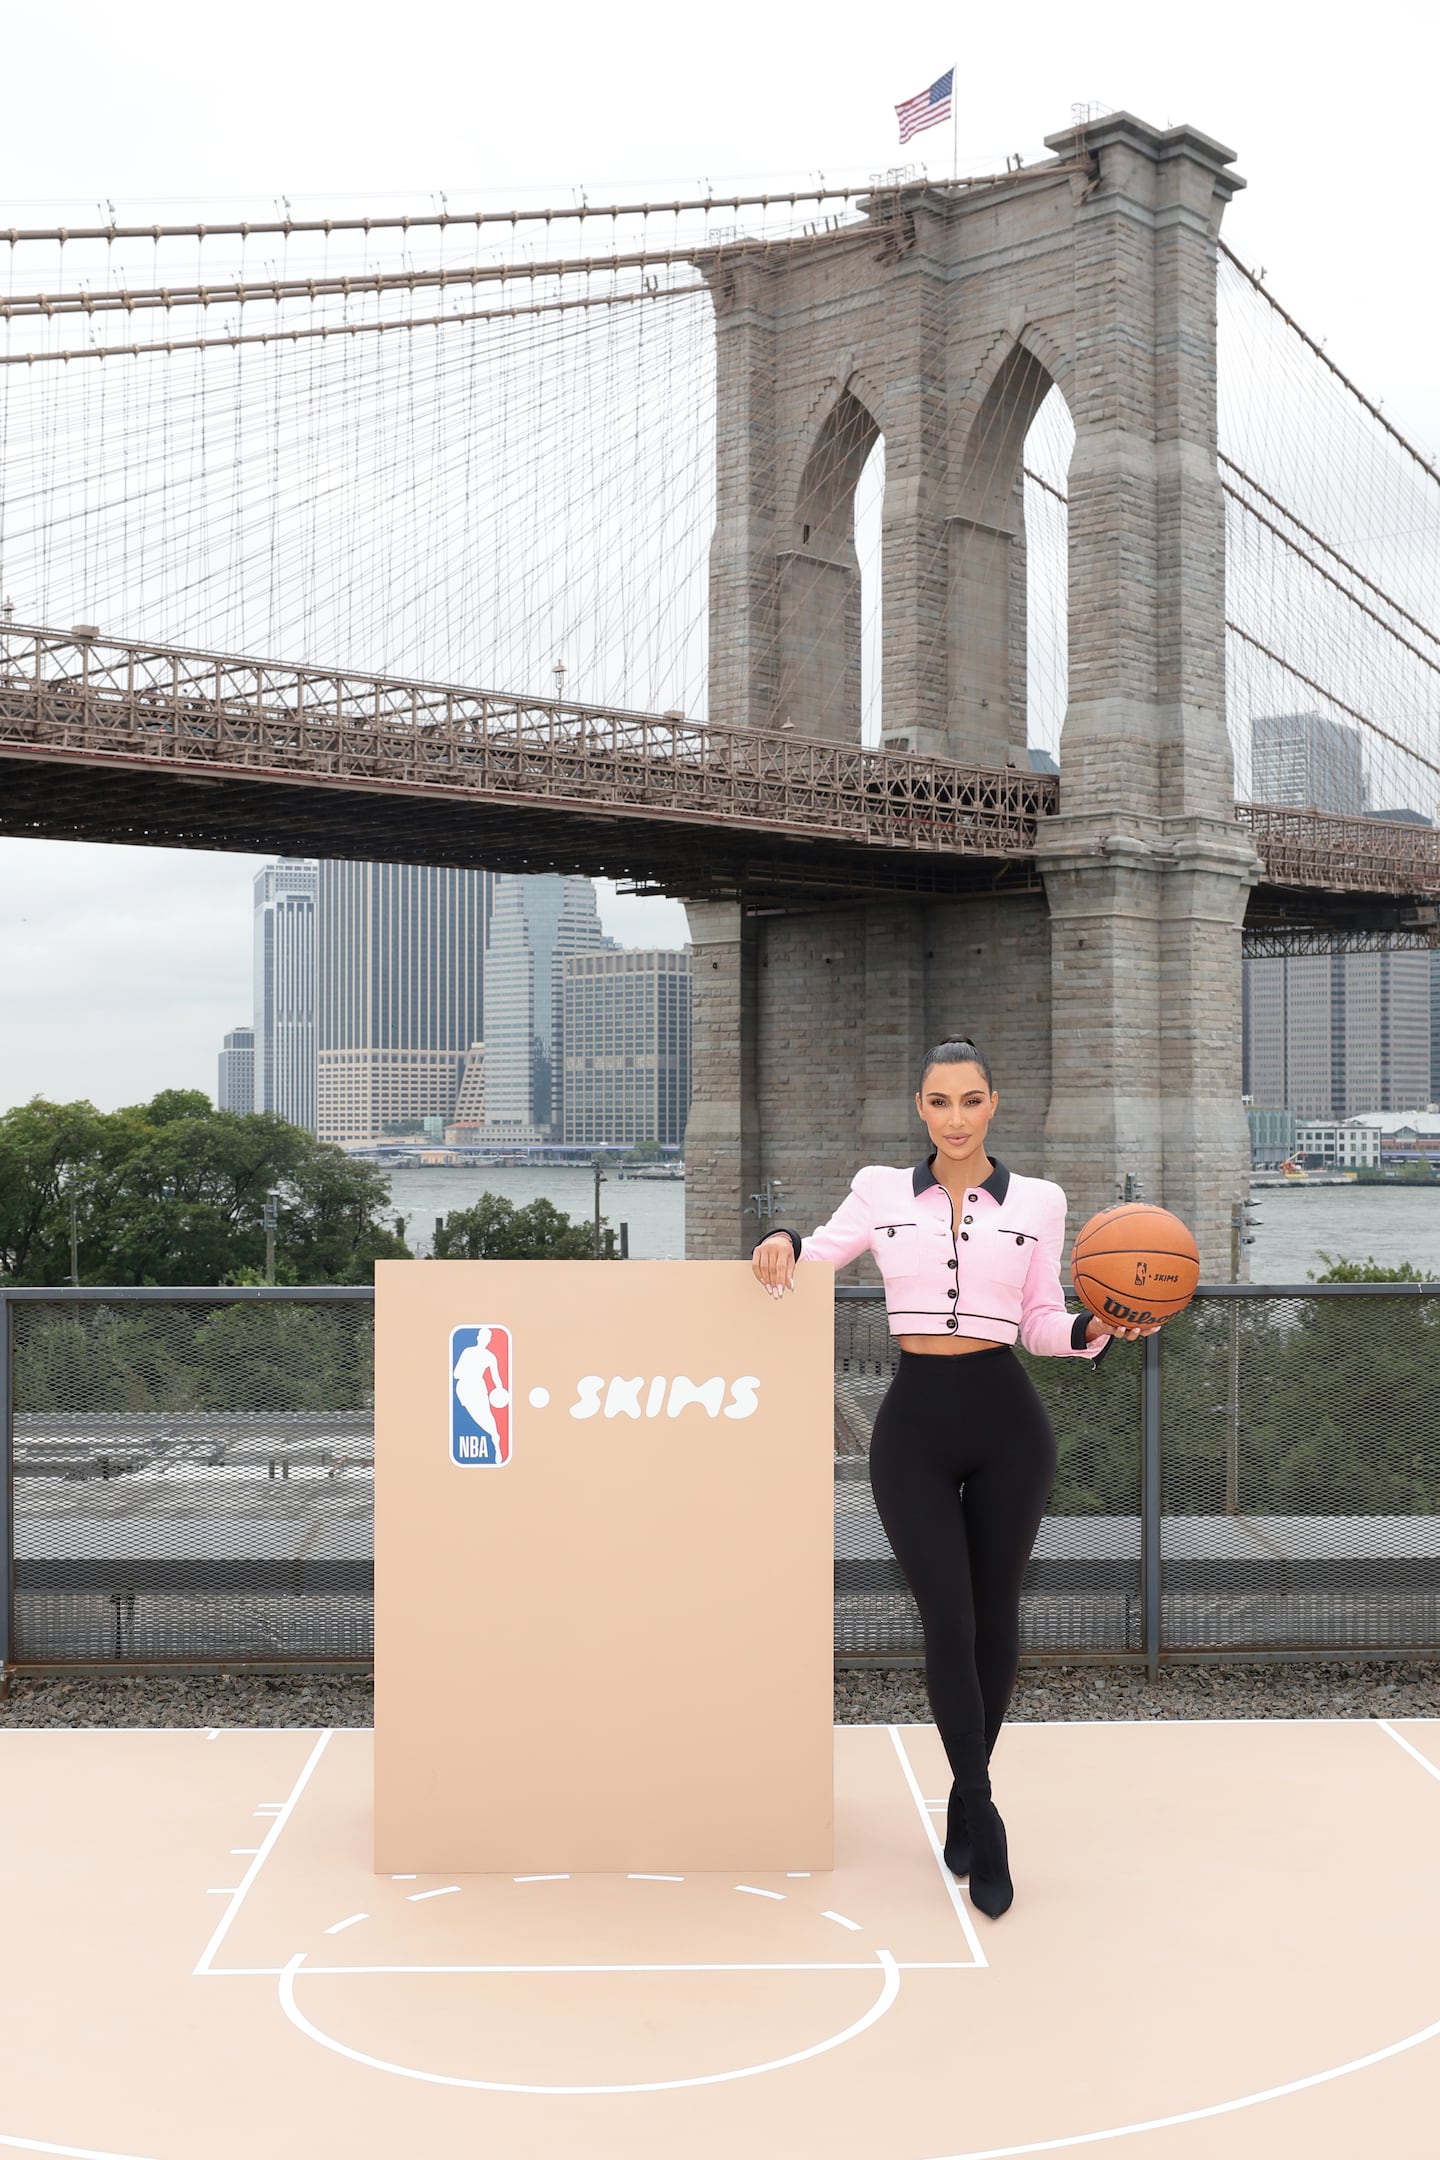 Kim Kardashian stands next to a podium with NBA and Skims signage holding a basketball. The Brooklyn Bridge in New York City is in the background.